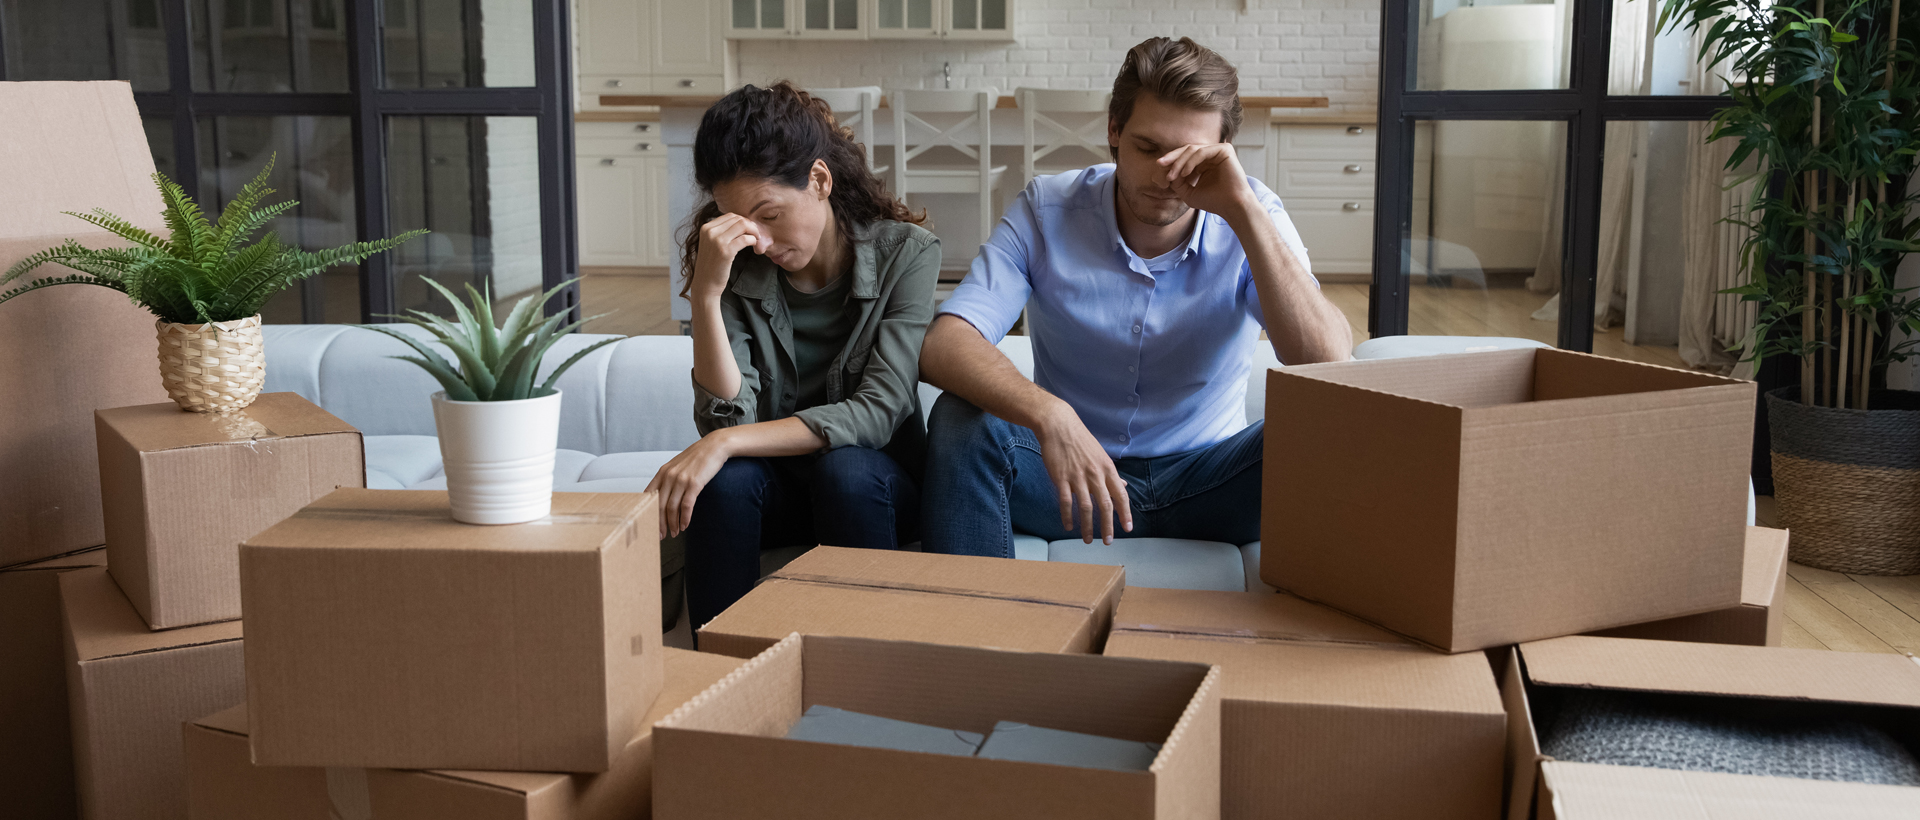 Concerned man and woman sitting in room surrounded by boxes.